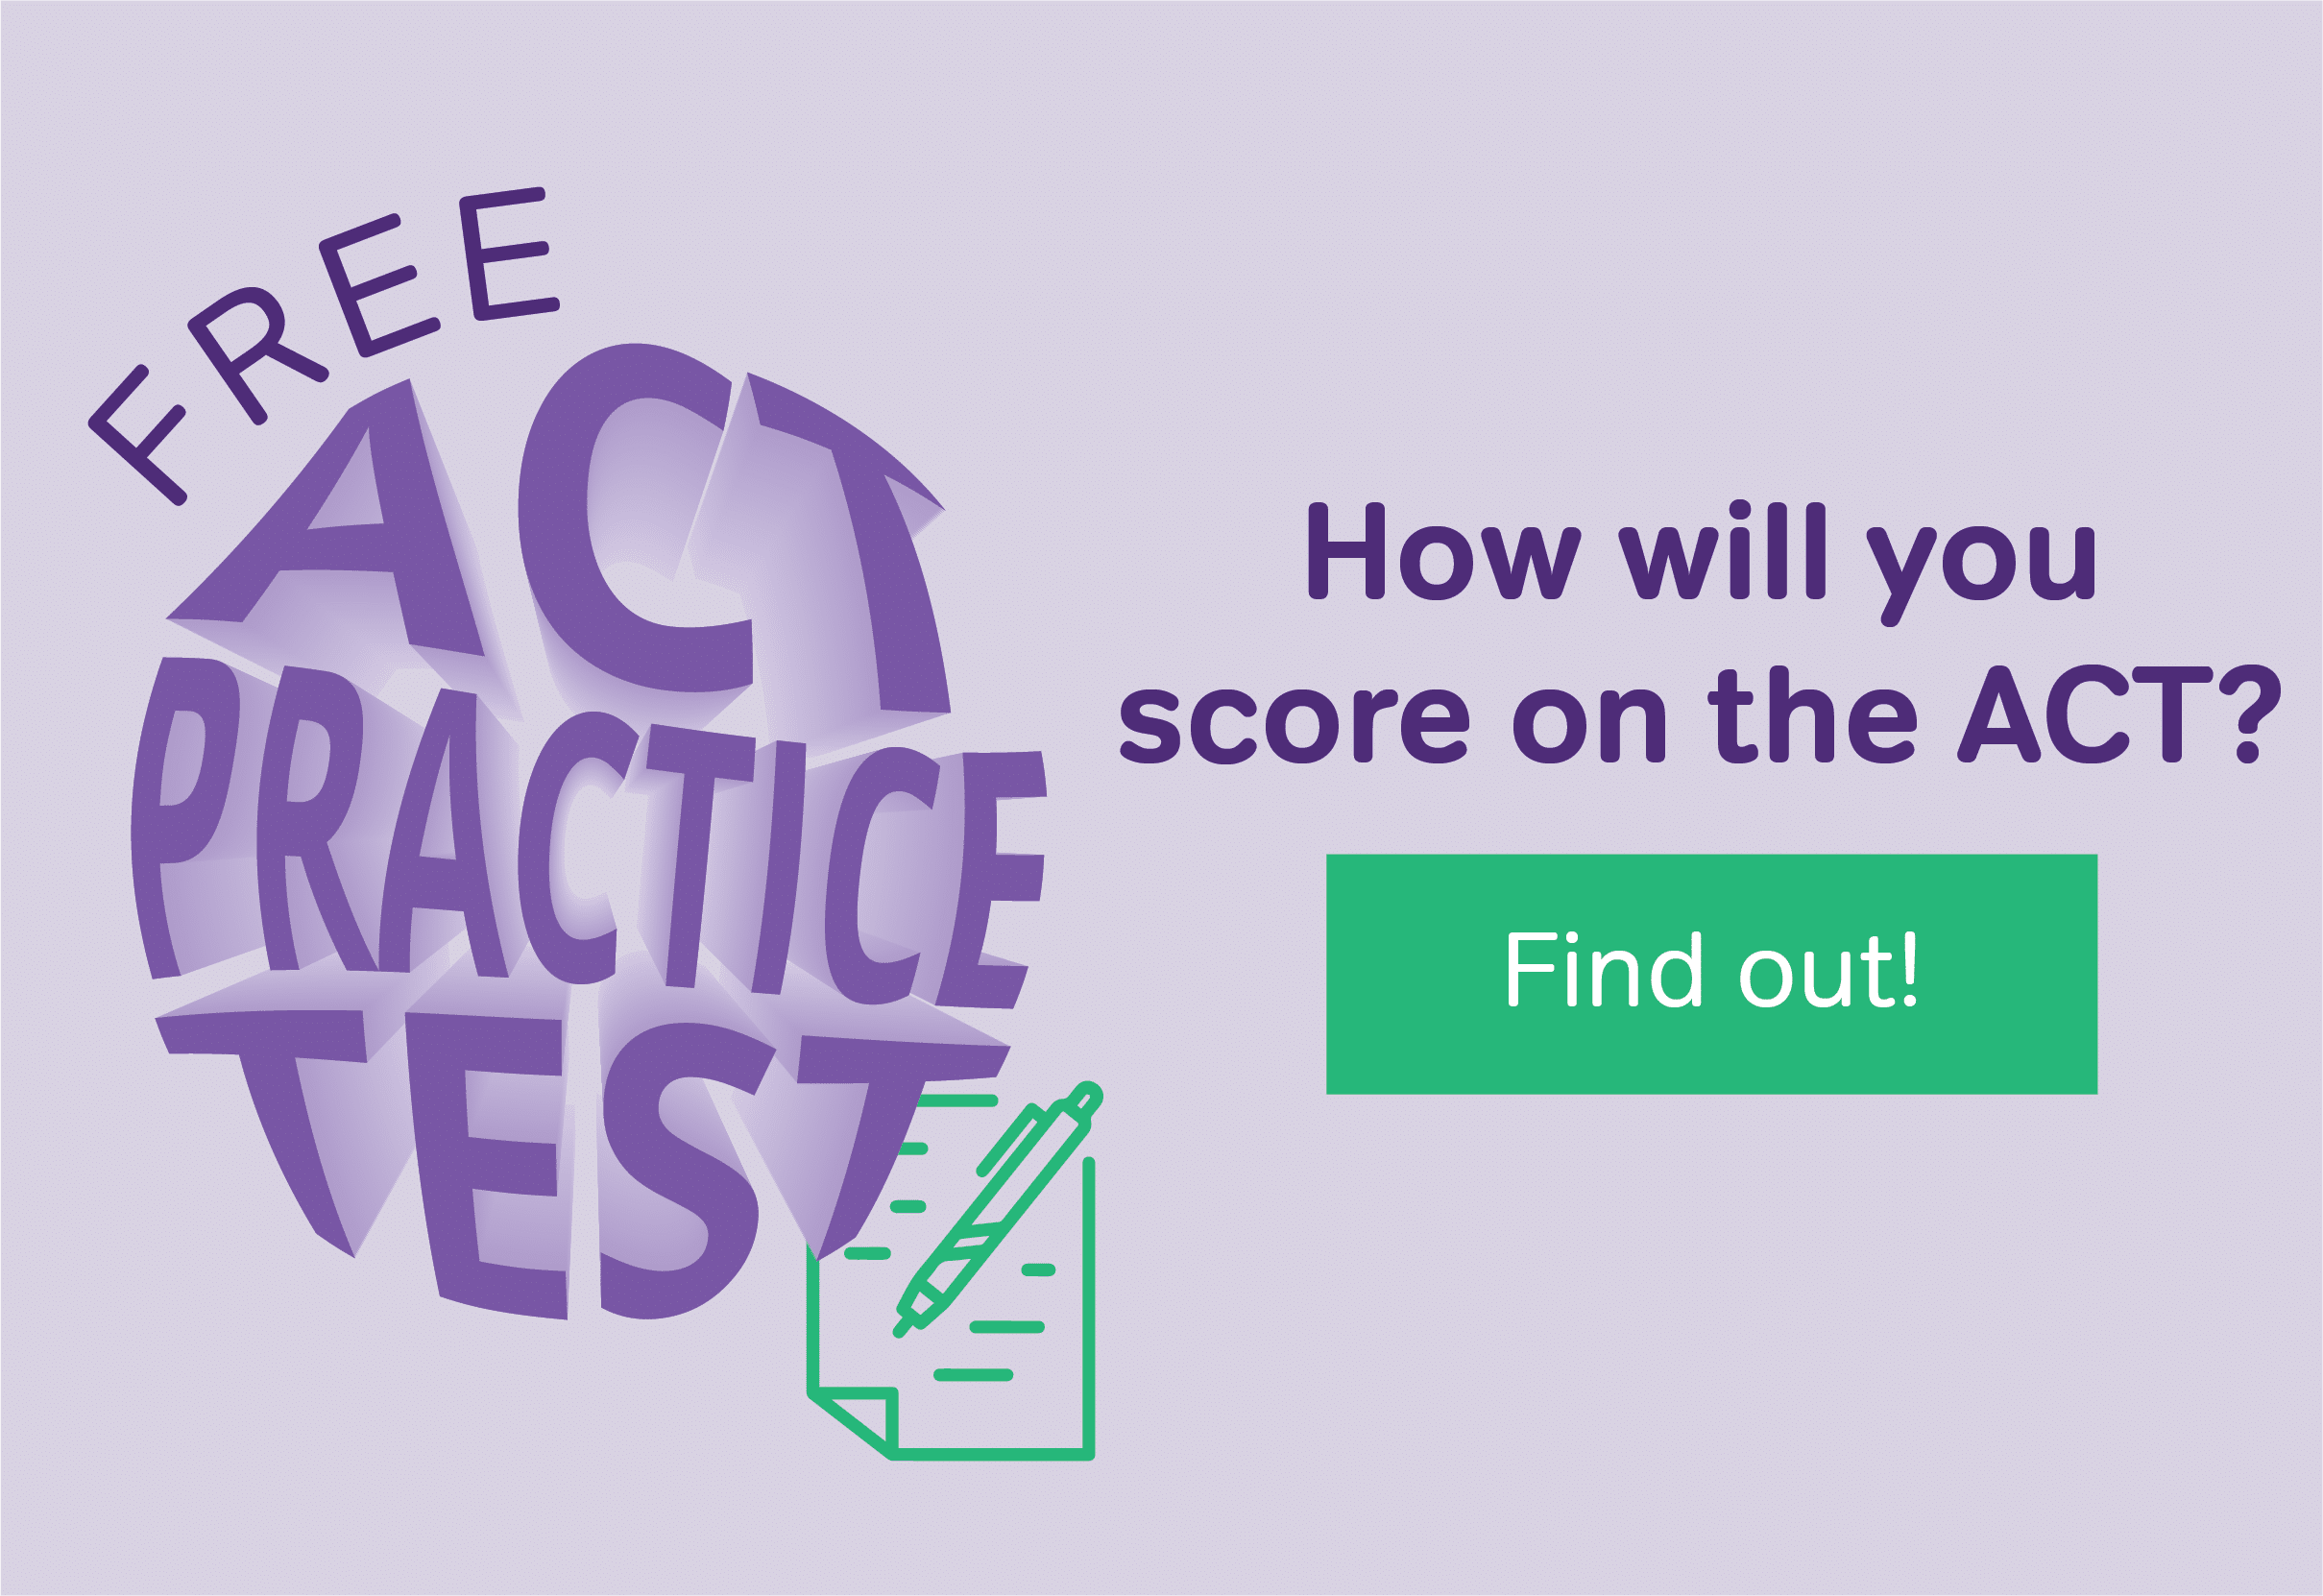 How will you score on the ACT? Find out!